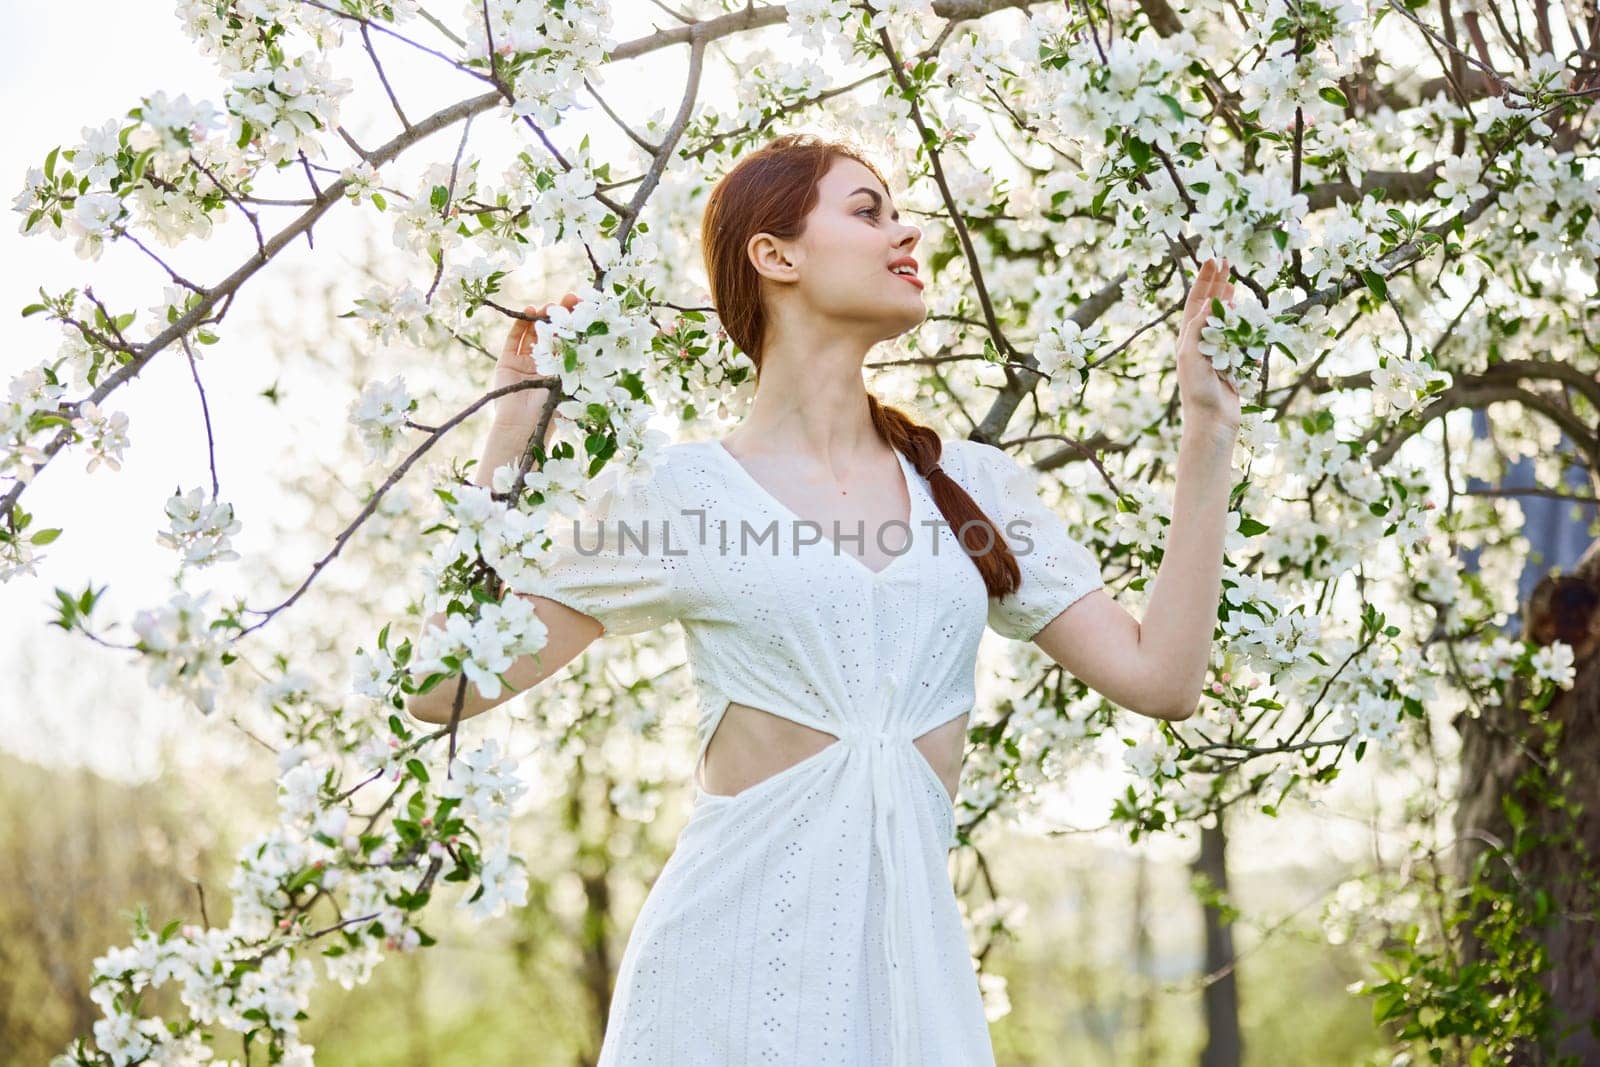 a slender, happy woman in a light dress poses next to a flowering tree in the countryside by Vichizh